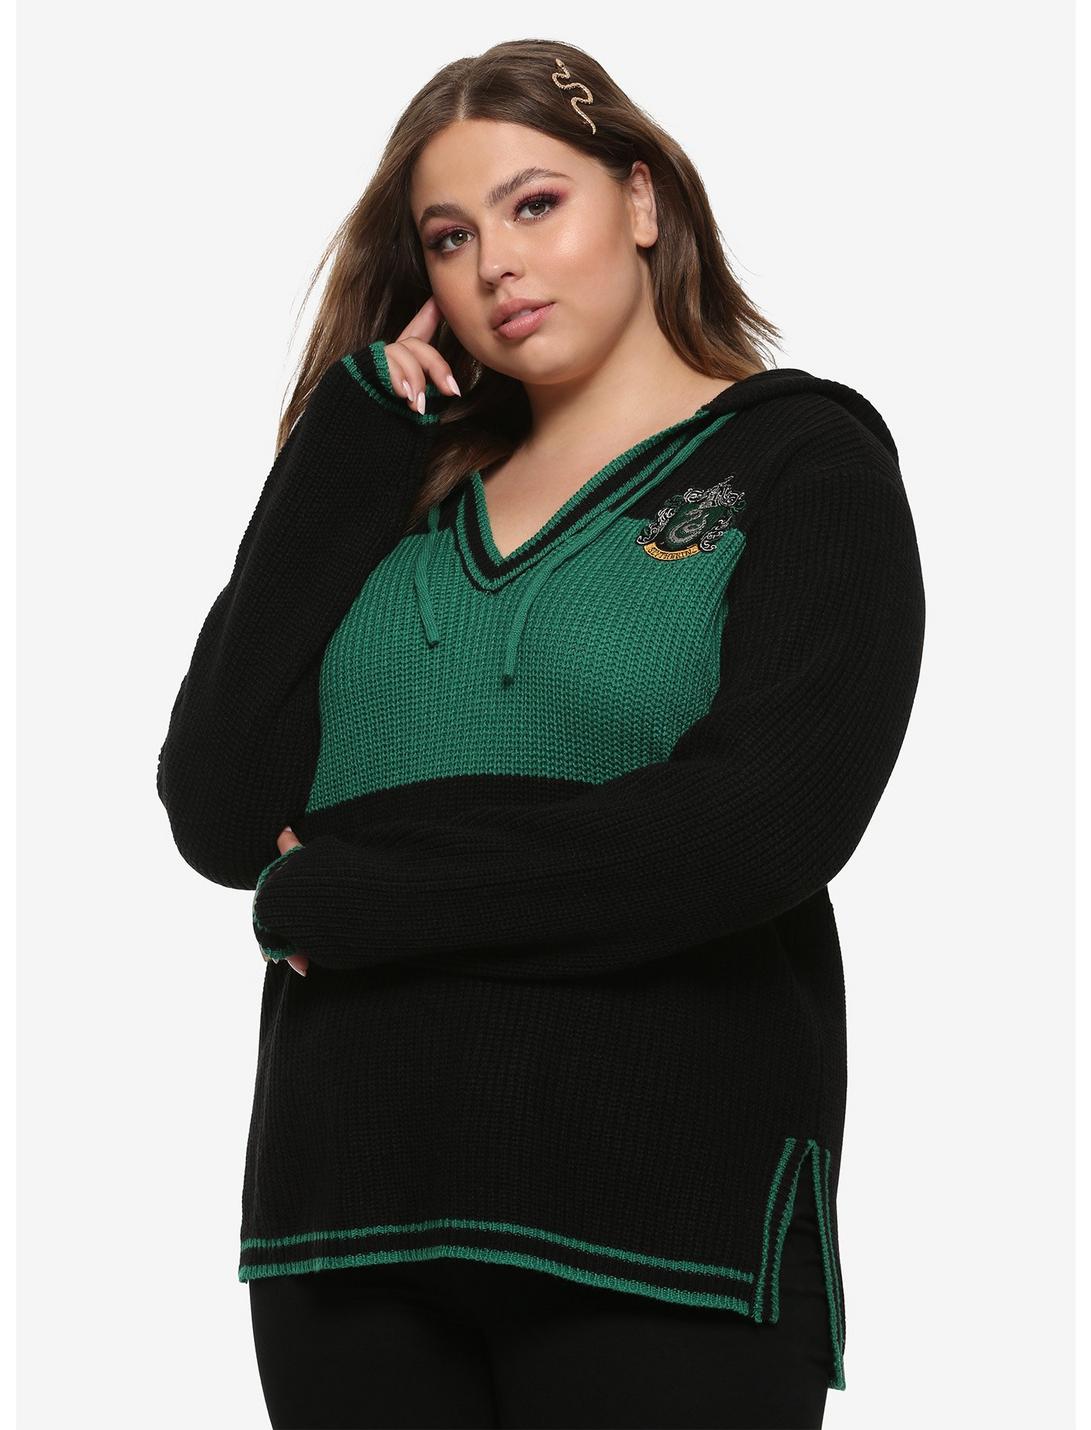 Harry Potter Slytherin Girls Hooded Sweater Plus Size, GREEN, hi-res